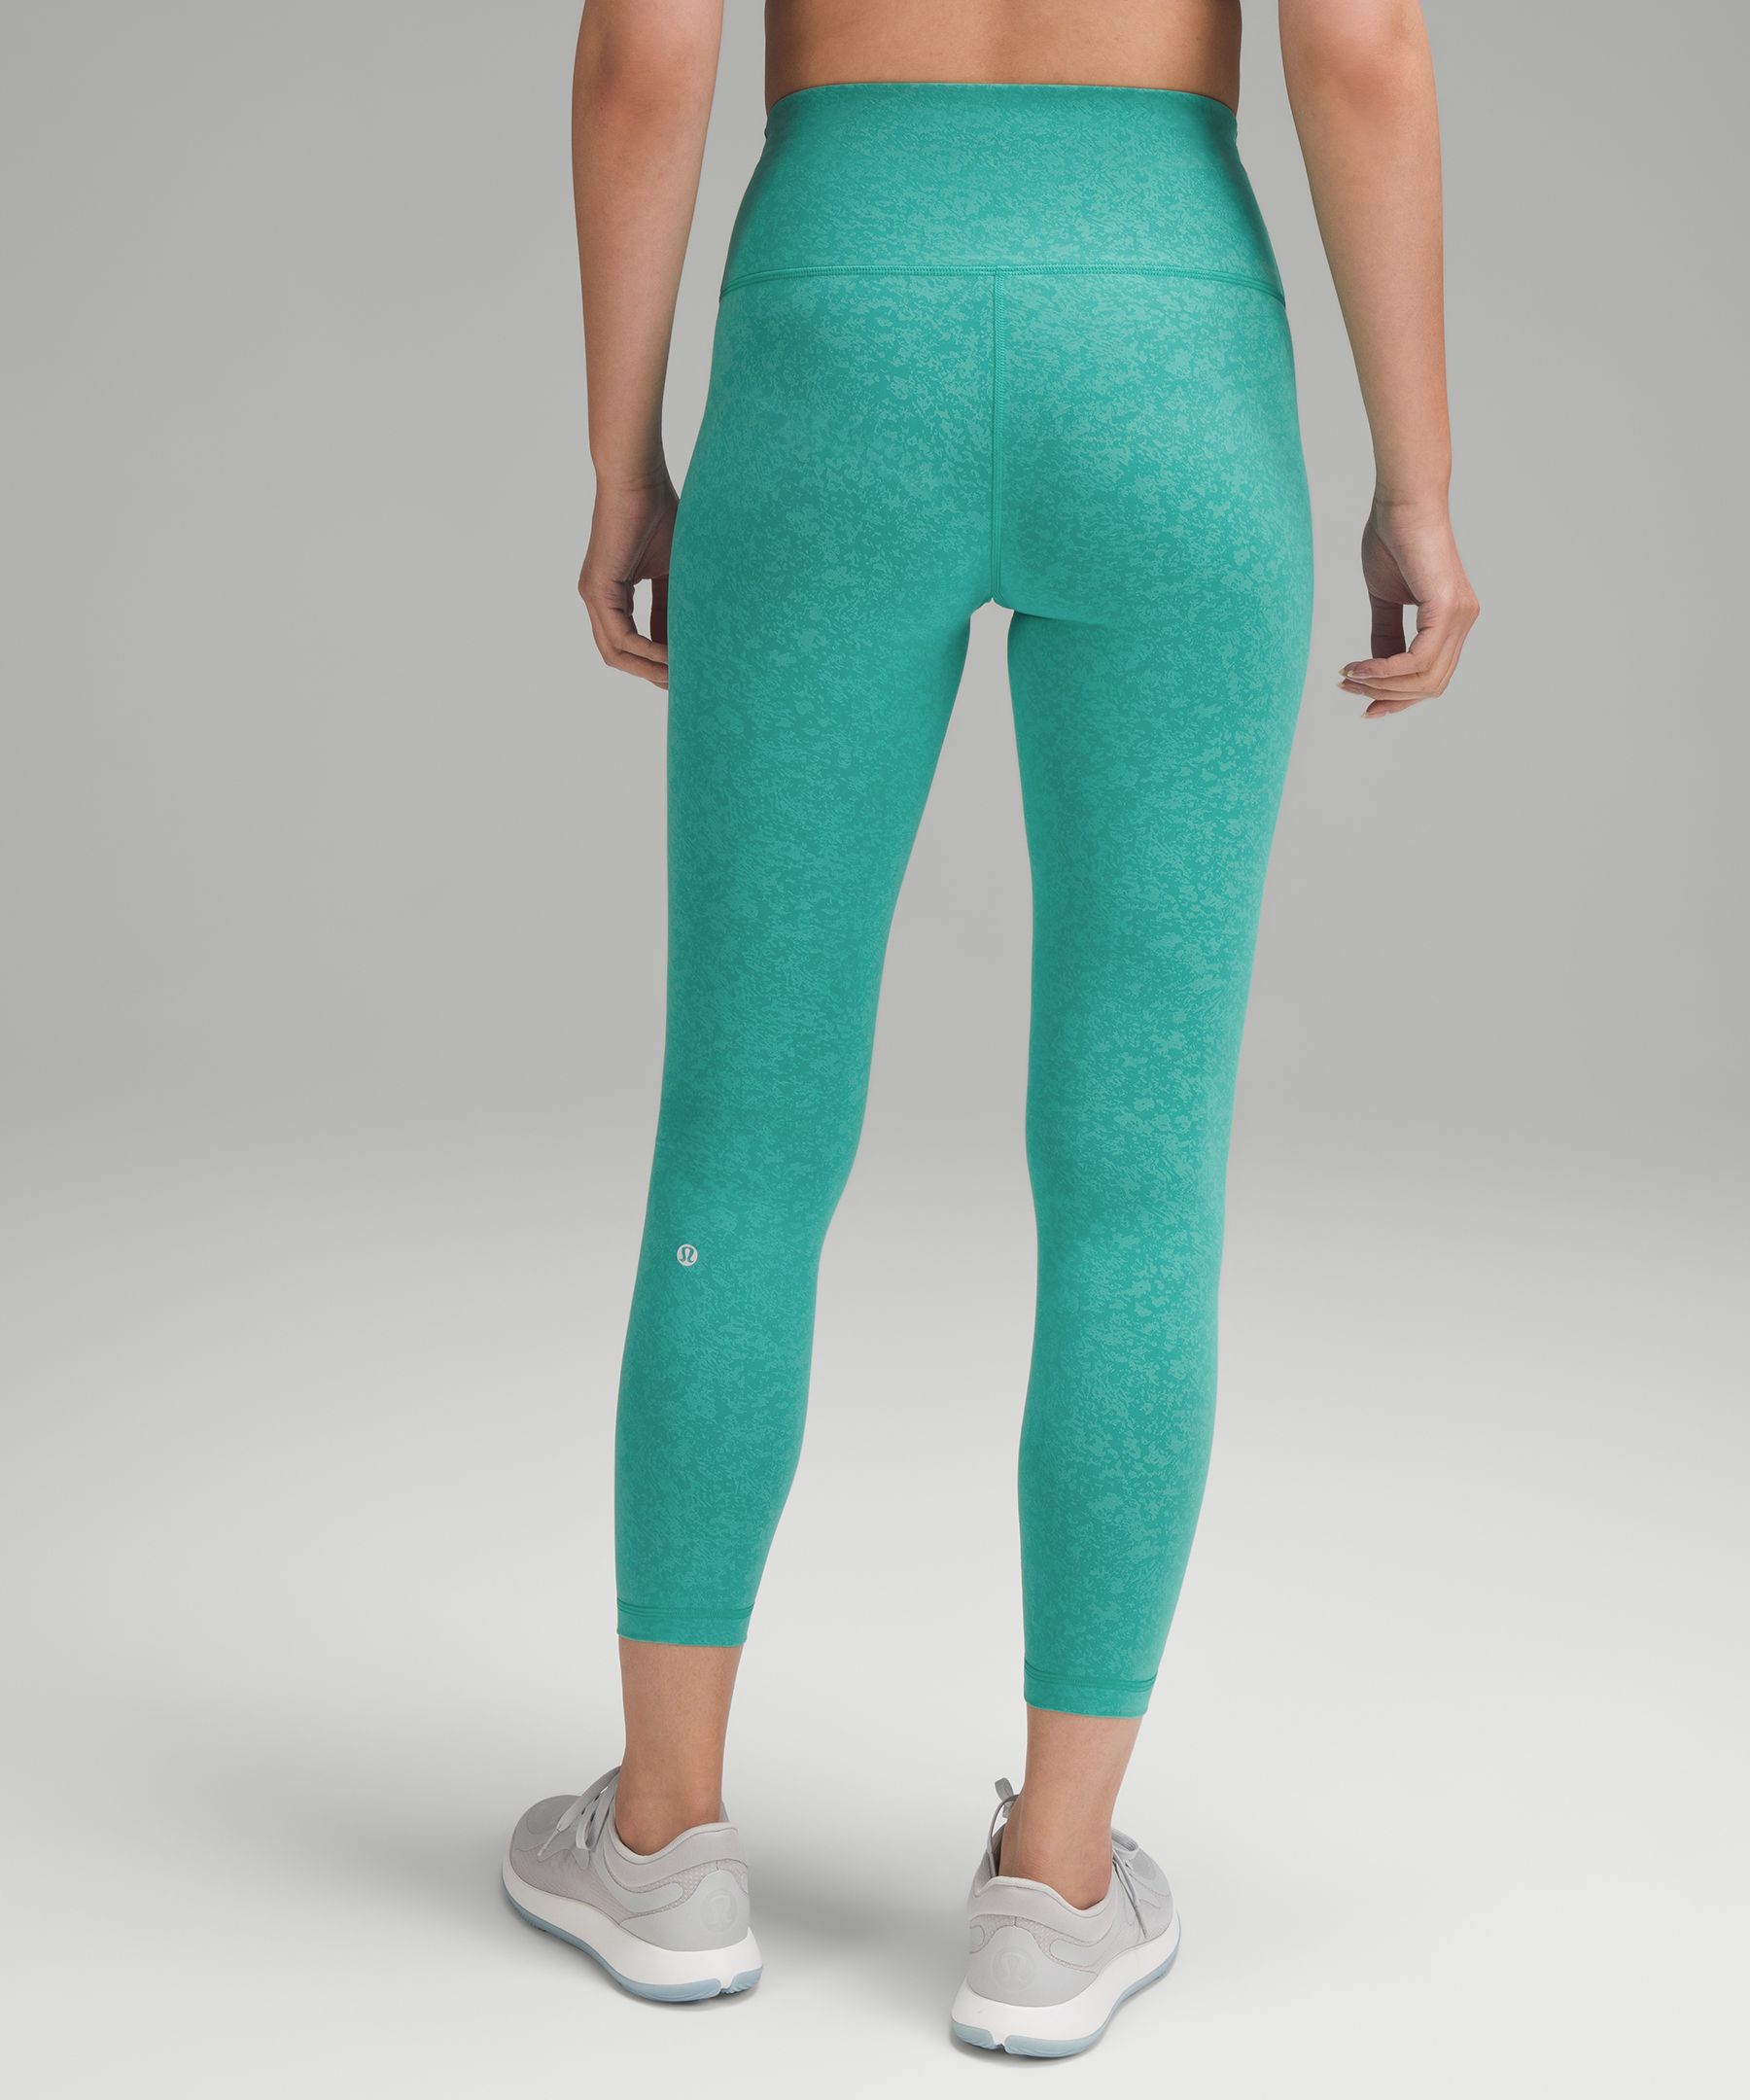 Storm teal wunder train legging size 6 and storm teal wunder train strappy  bra size 8 😎 : r/lululemon